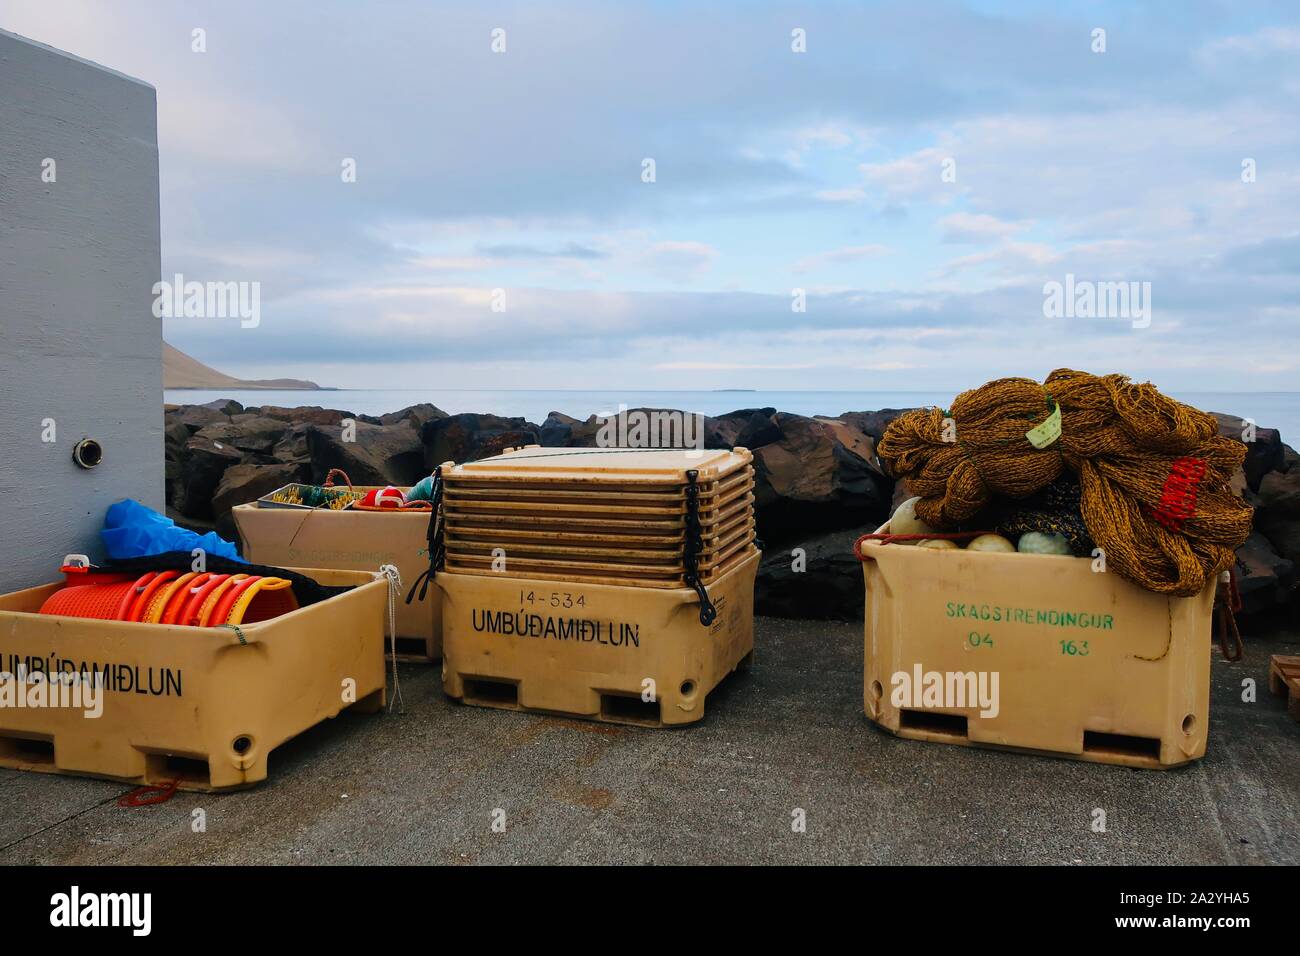 Grundarfjordur, Iceland - 27 September 2019: Fishing nets in the harbour. The fishing industry is this small town’s major source of income. Stock Photo